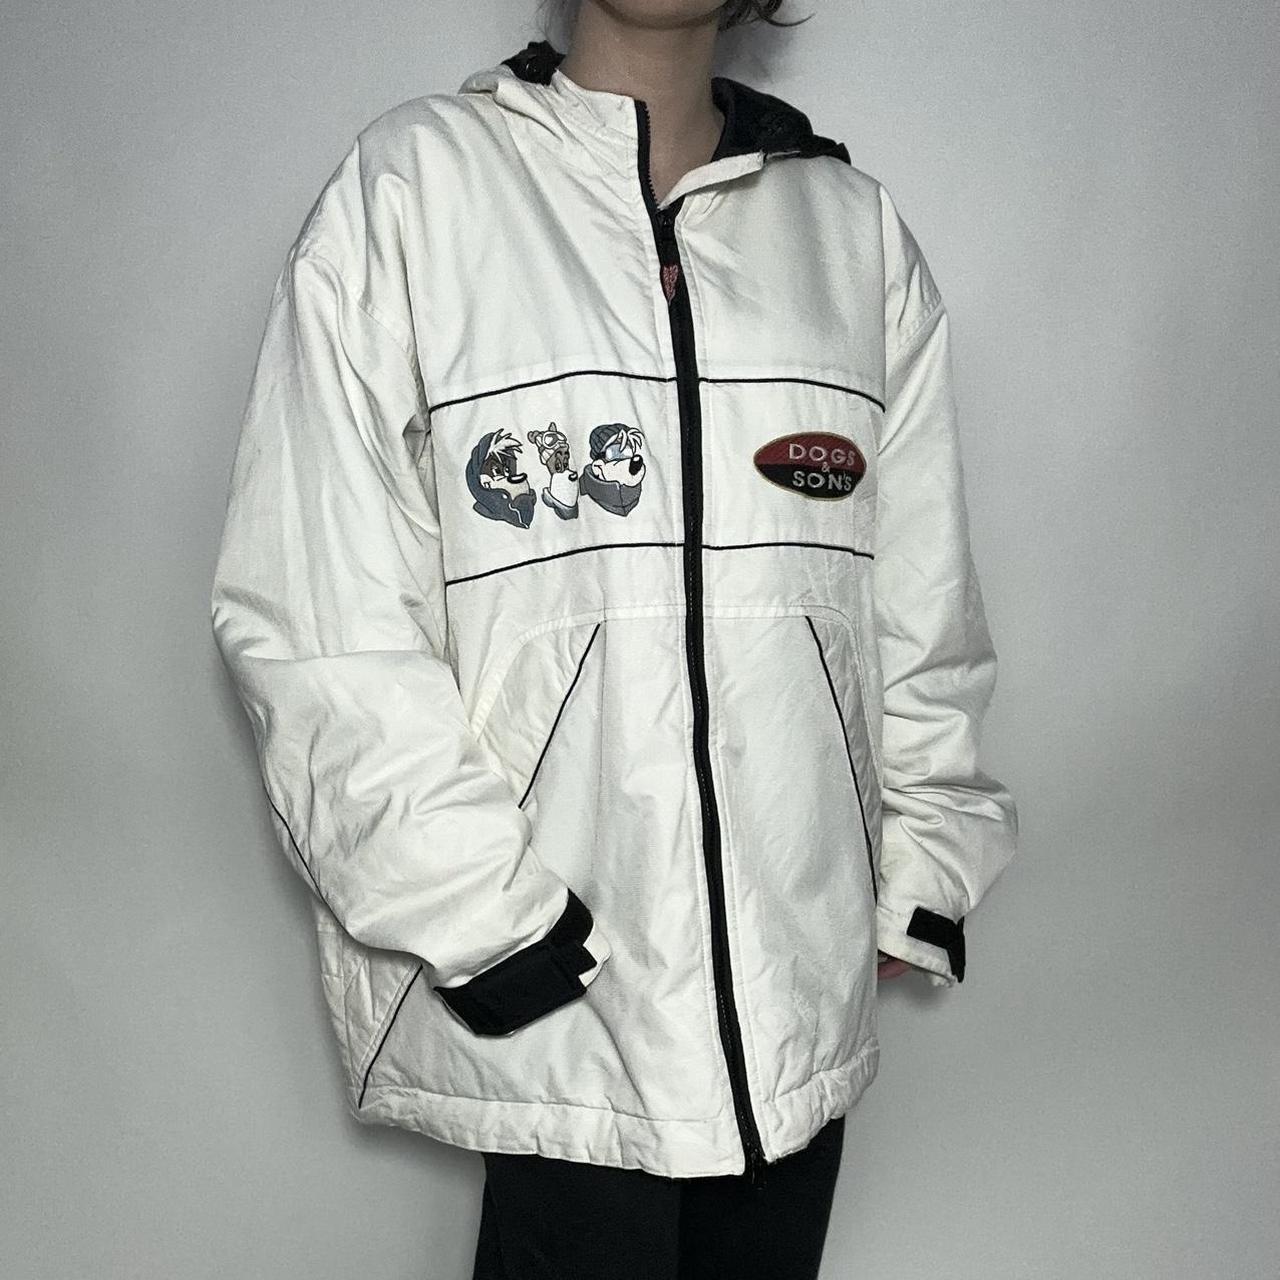 Vintage 90s Dogs and Sons zip up anorak jacket